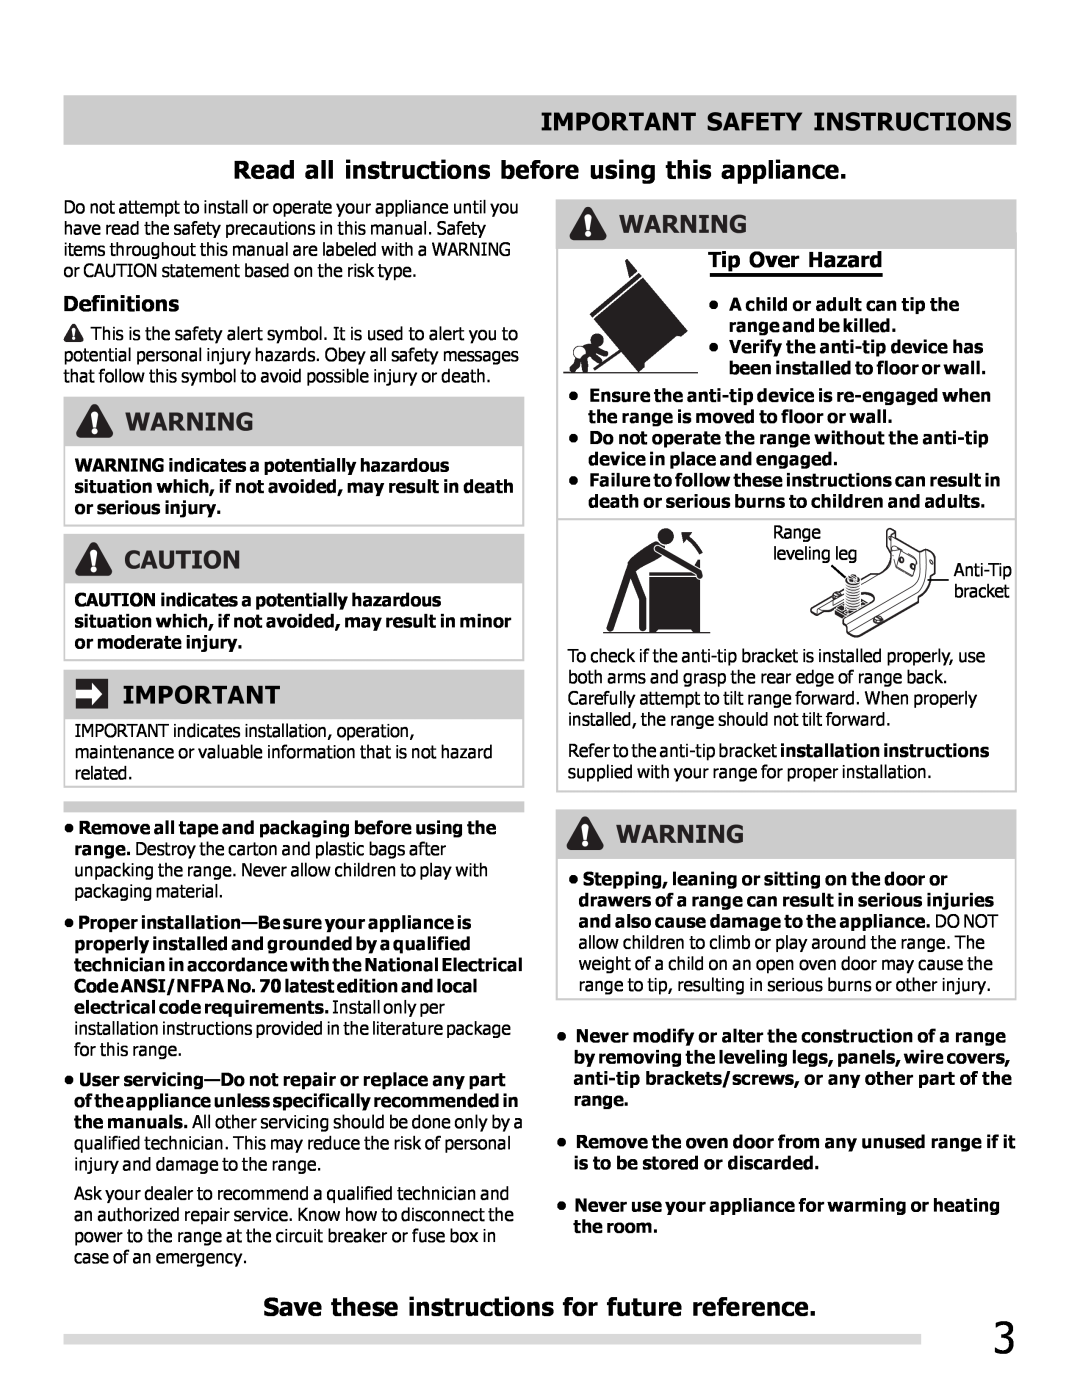 Frigidaire FGEF3030PF Important Safety Instructions, Read all instructions before using this appliance, Definitions 